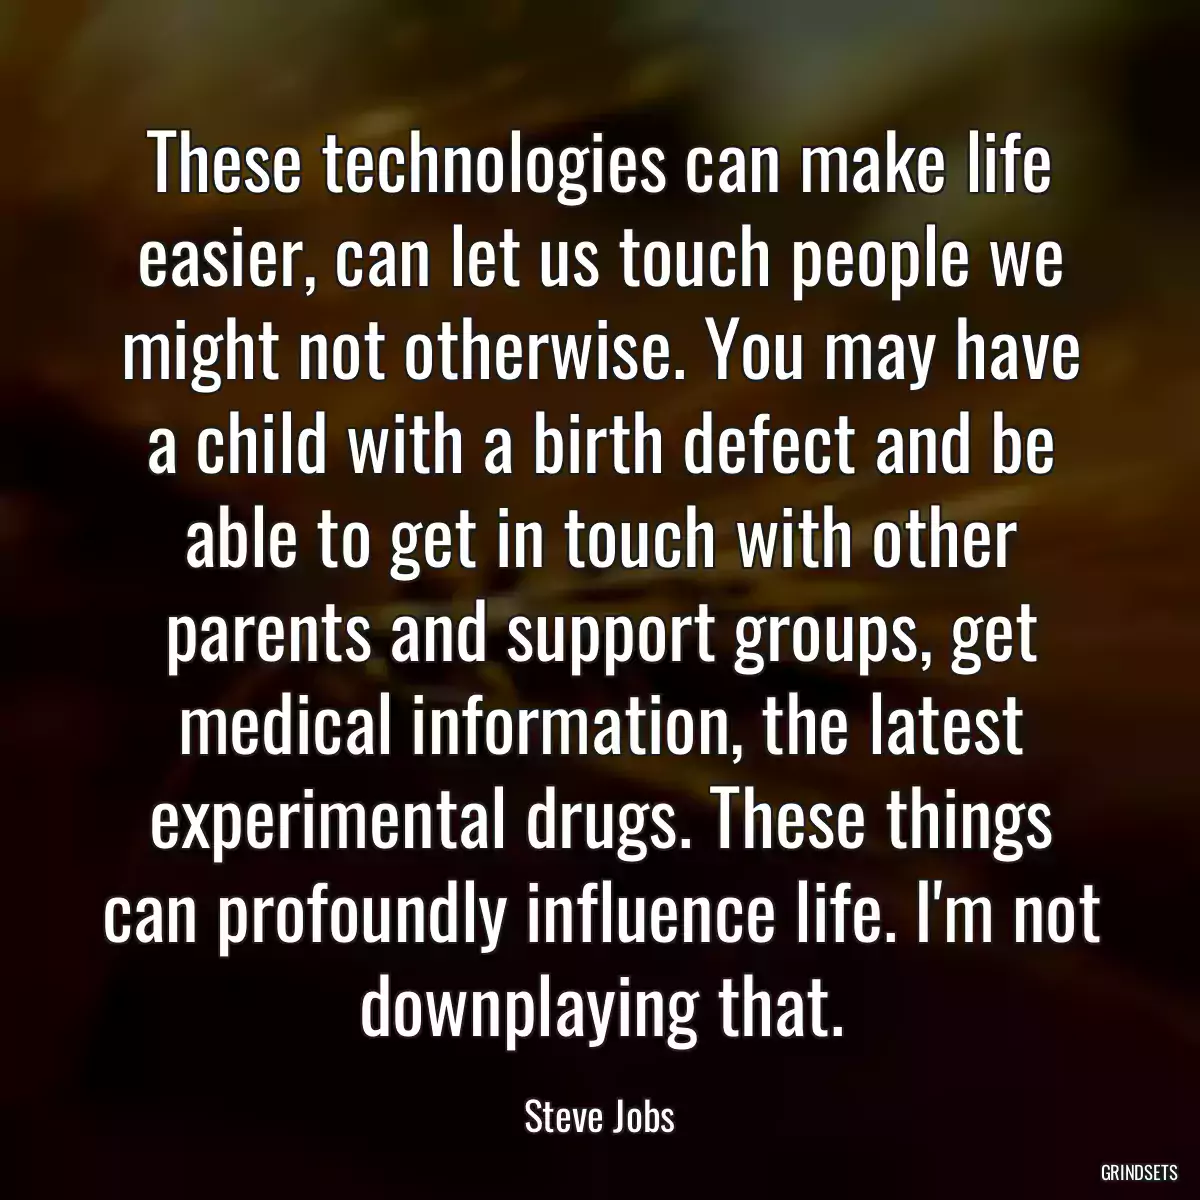 These technologies can make life easier, can let us touch people we might not otherwise. You may have a child with a birth defect and be able to get in touch with other parents and support groups, get medical information, the latest experimental drugs. These things can profoundly influence life. I\'m not downplaying that.